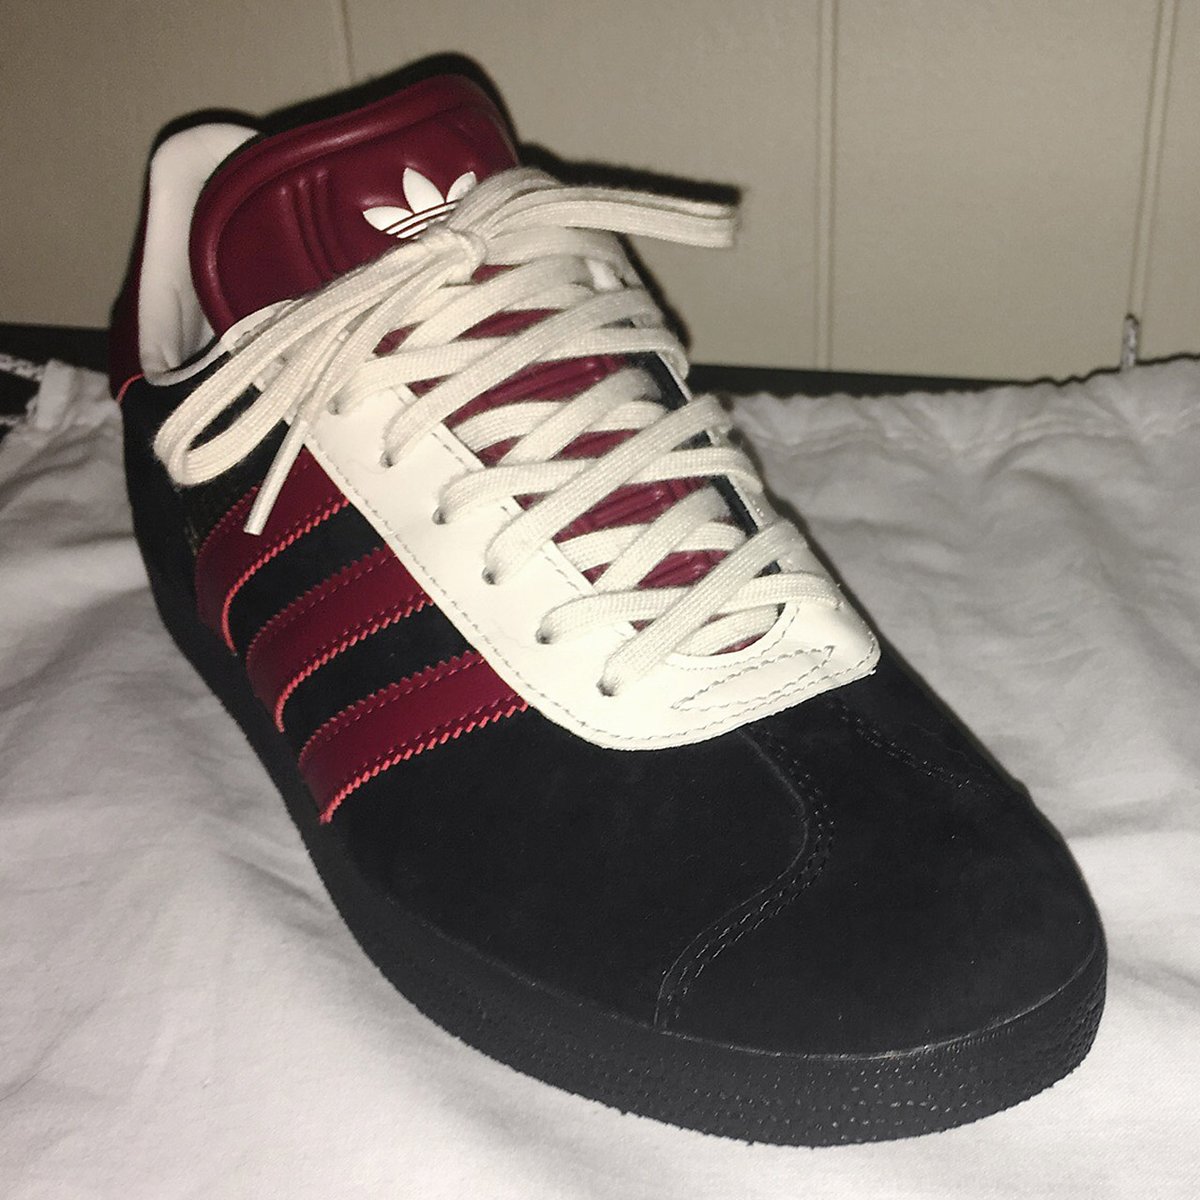 Today's shoe lacing photo was contributed by Seth P. in Mar-2018. Maroon, black & white Adidas Gazelles laced with white “Over Under Lacing”.
#maroon #black #white #adidas #gazelle #adidasgazelle #overunderlacing #overunder